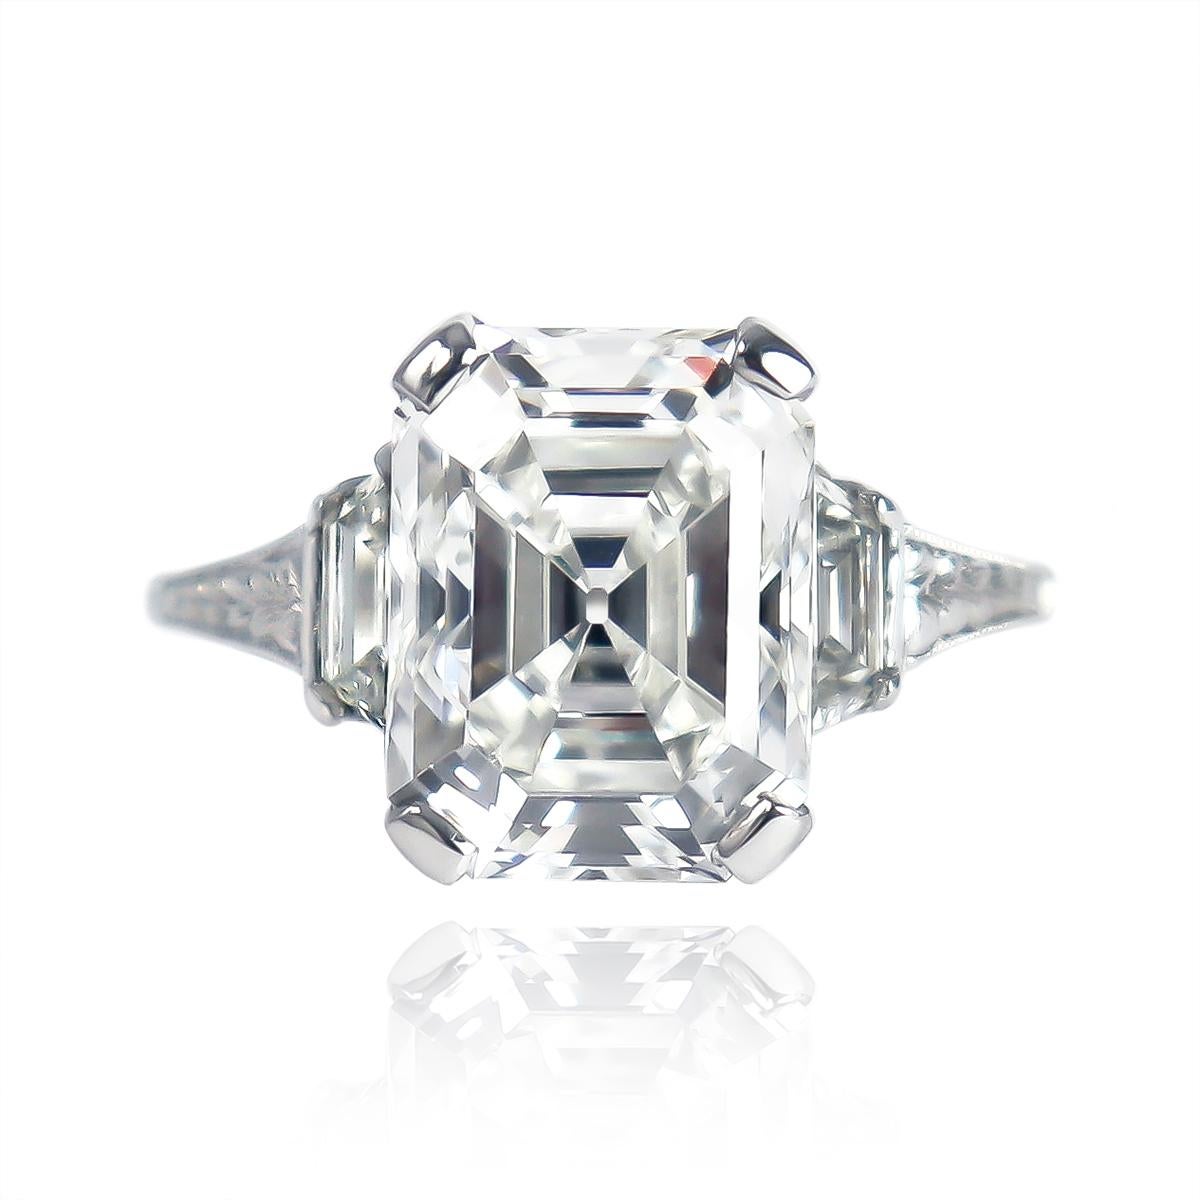 An exceptional, one of a kind piece from the J. Birnbach vault. This exquisite platinum Art Deco ring featuring a 4.07 carat emerald cut diamond is a prime example of the craftsmanship and detail of the period. 

The center diamond is certified by